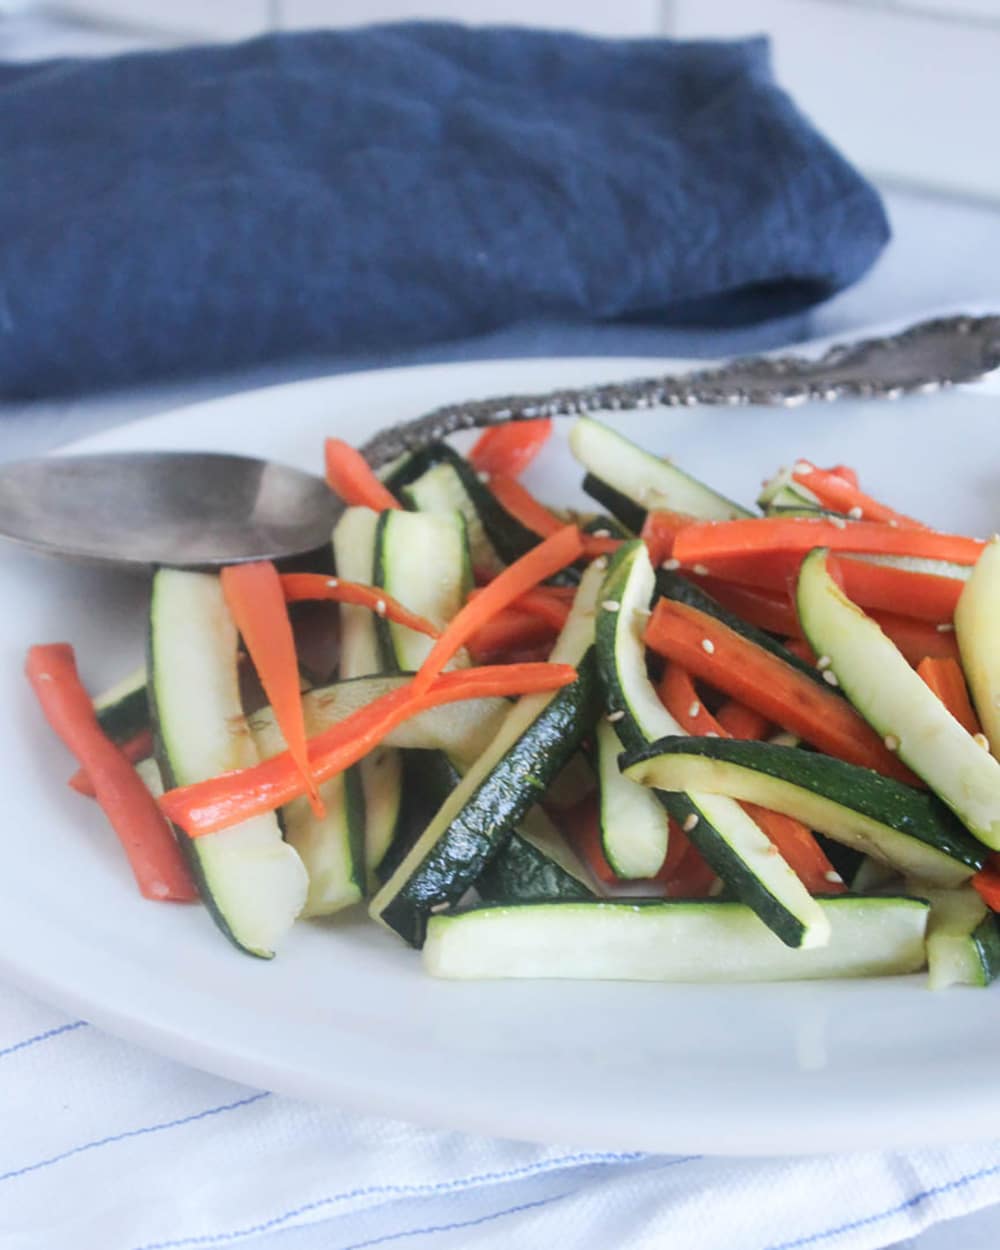 A picture of zucchini and carrots on a plate with a spoon